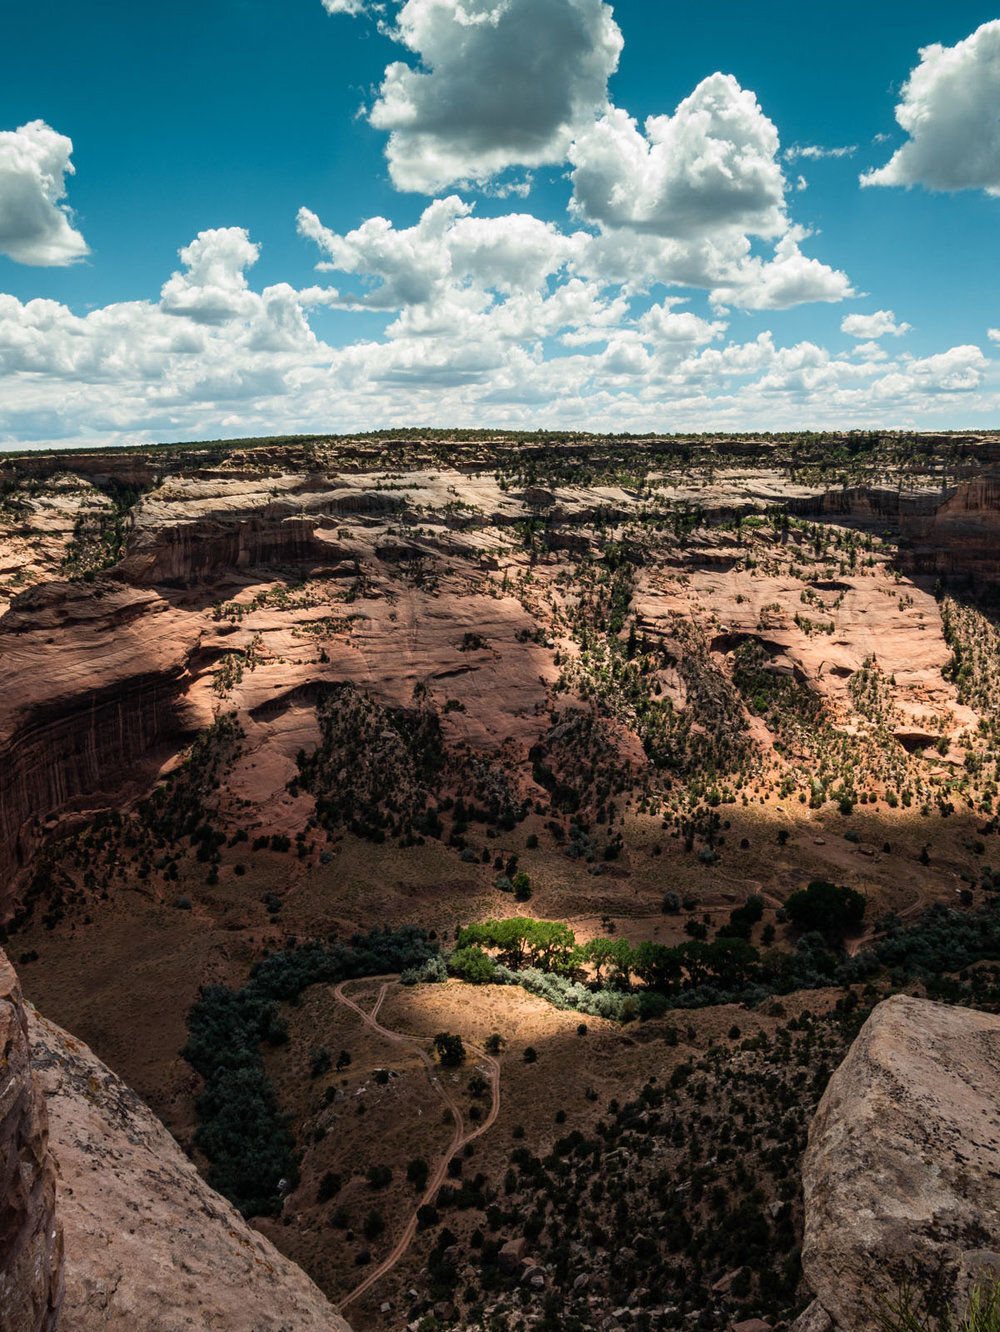 8abc9-co_vacationmoon_canyondechelly-1000630.jpg